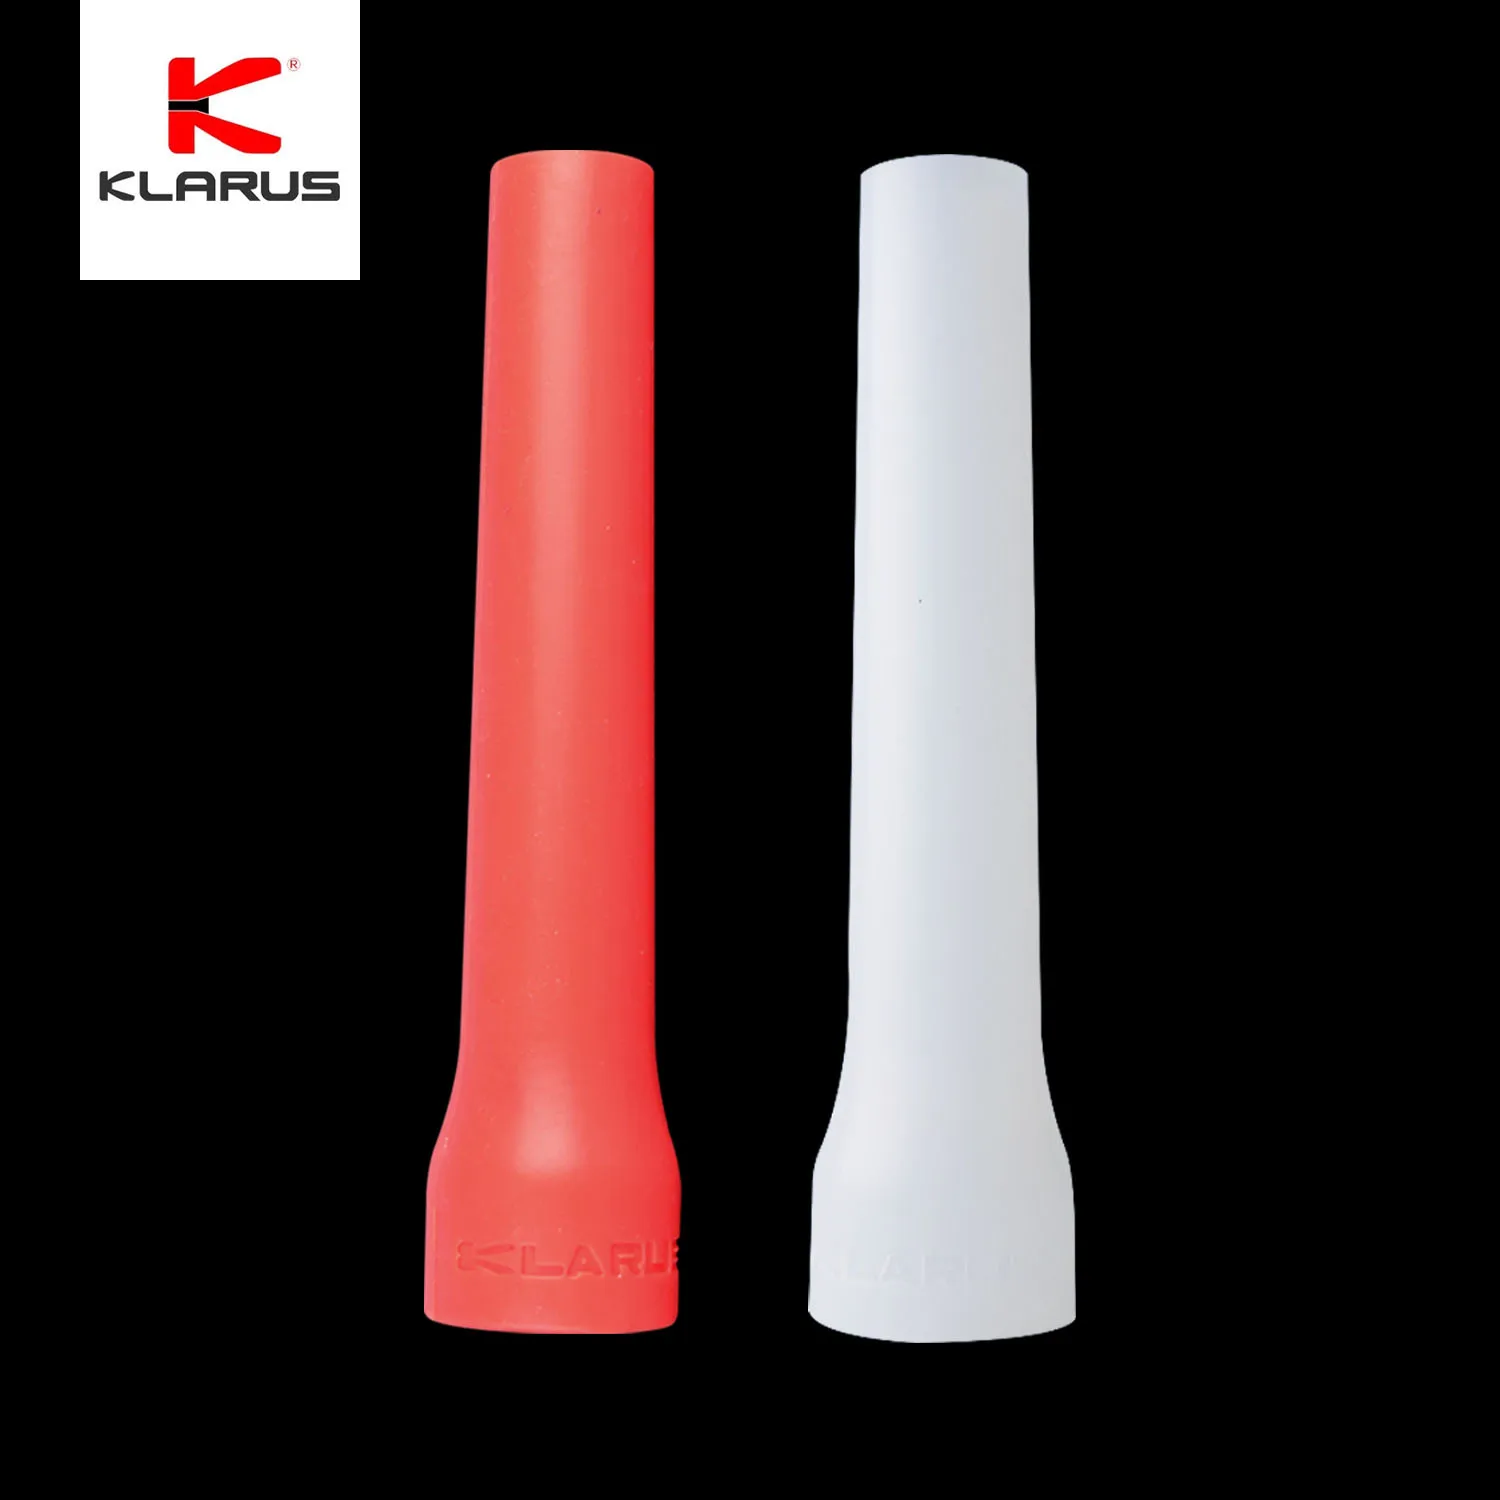 Klarus Traffic/Signal Wand KDF-1 for Flashlight Head Diameter 33-35mm, High Elasticity, Stretchable, Collapsible, Red/White